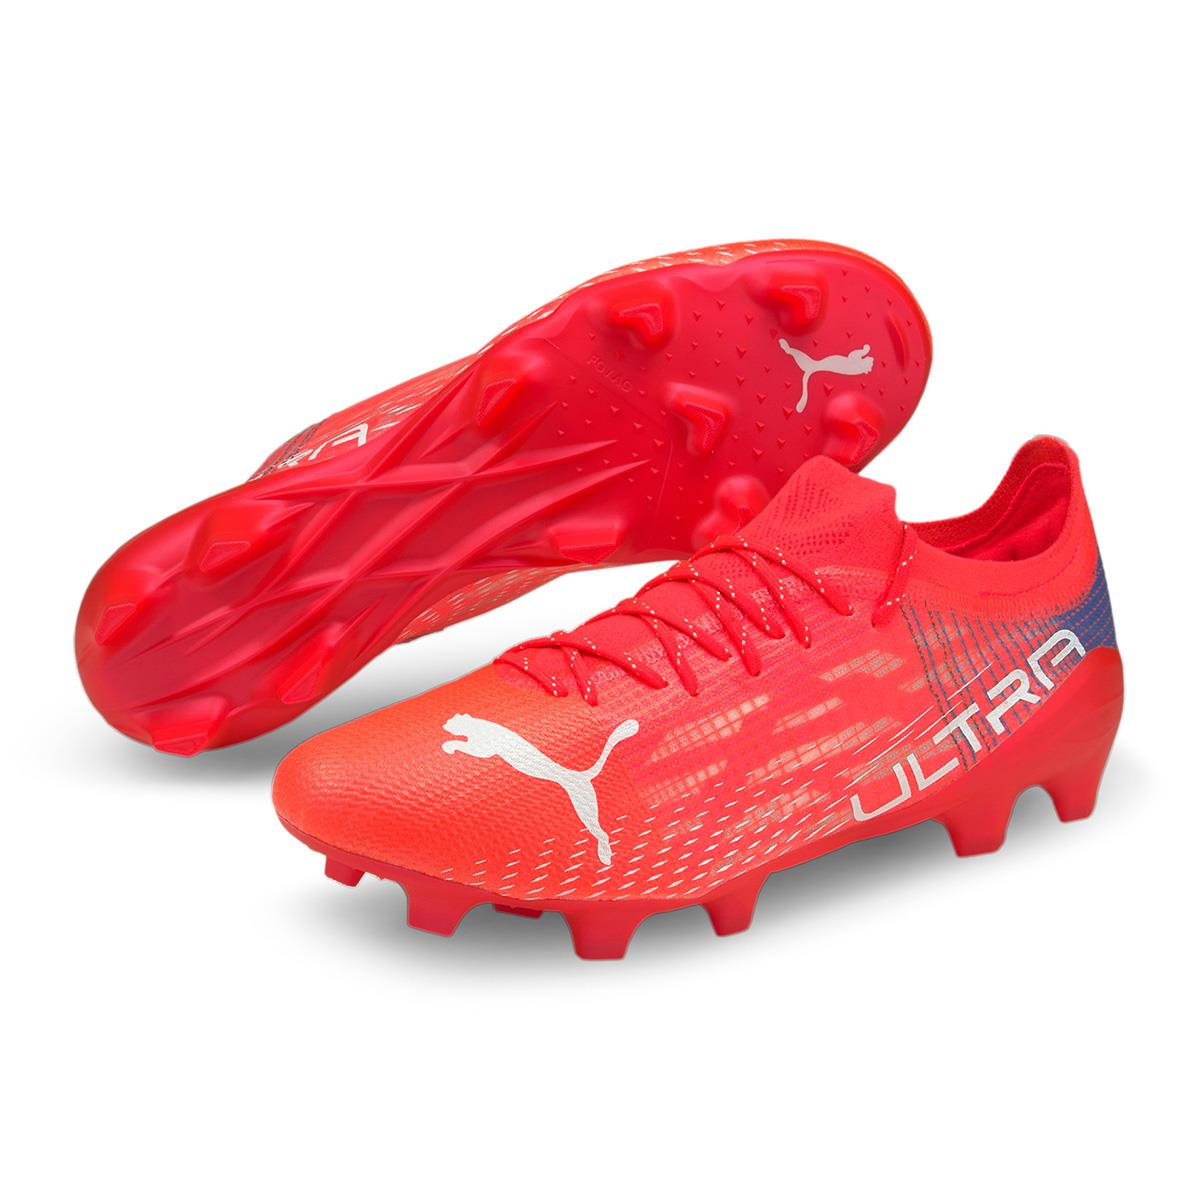 Chaussures Ultra 1.3 FG/AG